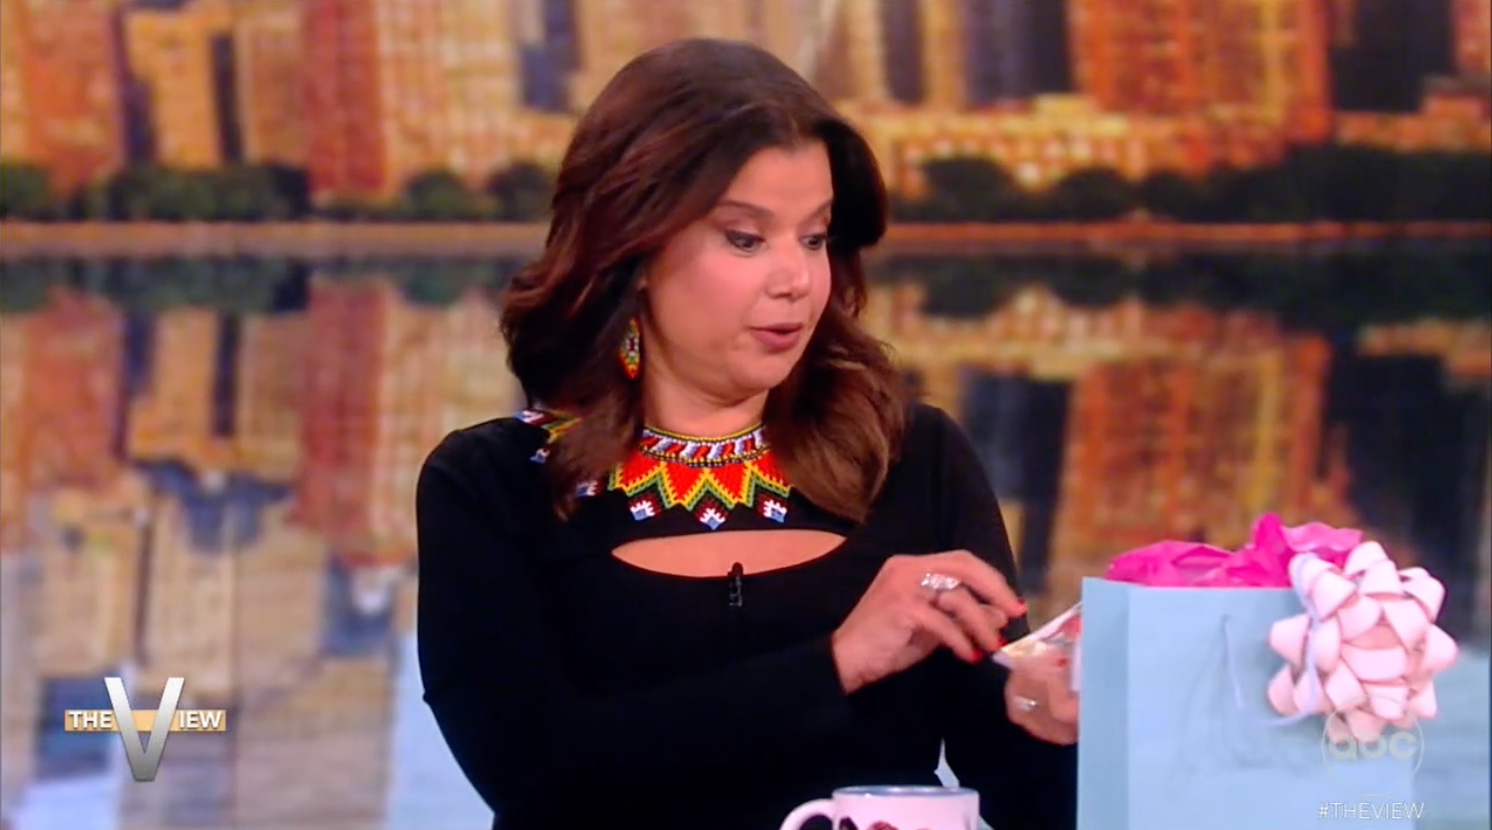 Ana brought gifts to her co-hosts, Alyssa Farah Griffin, Sara Haines, Sunny Hostin, and Joy Behar, on Friday's episode